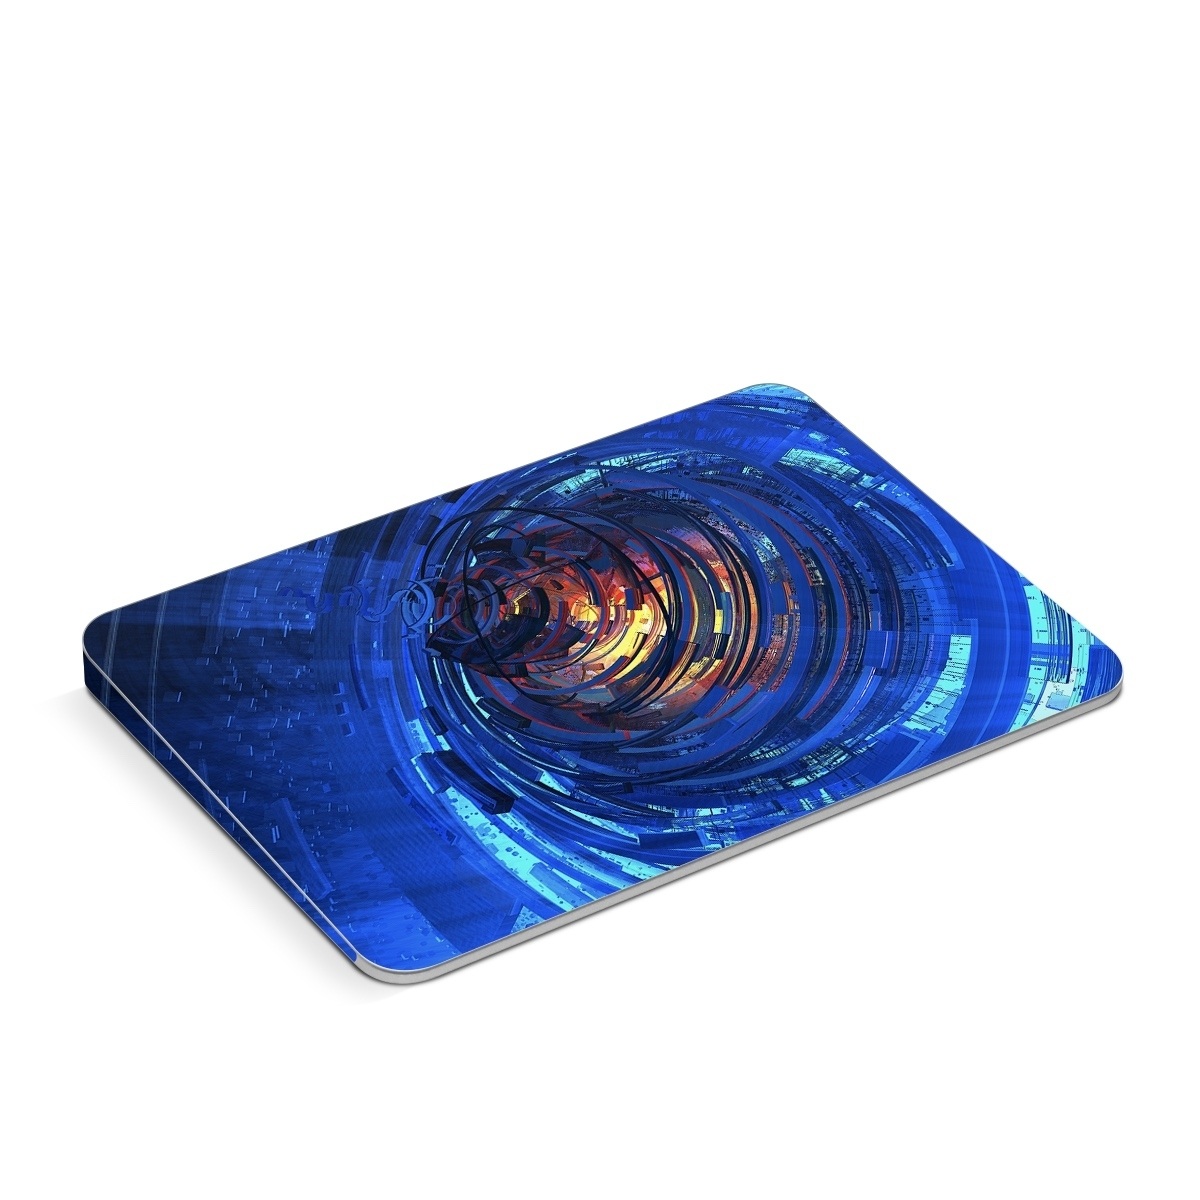 Apple Magic Trackpad Skin design of Blue, Water, Circle, Vortex, Electric blue, Wave, Liquid, Graphics, Pattern, Colorfulness, with blue, orange, yellow colors